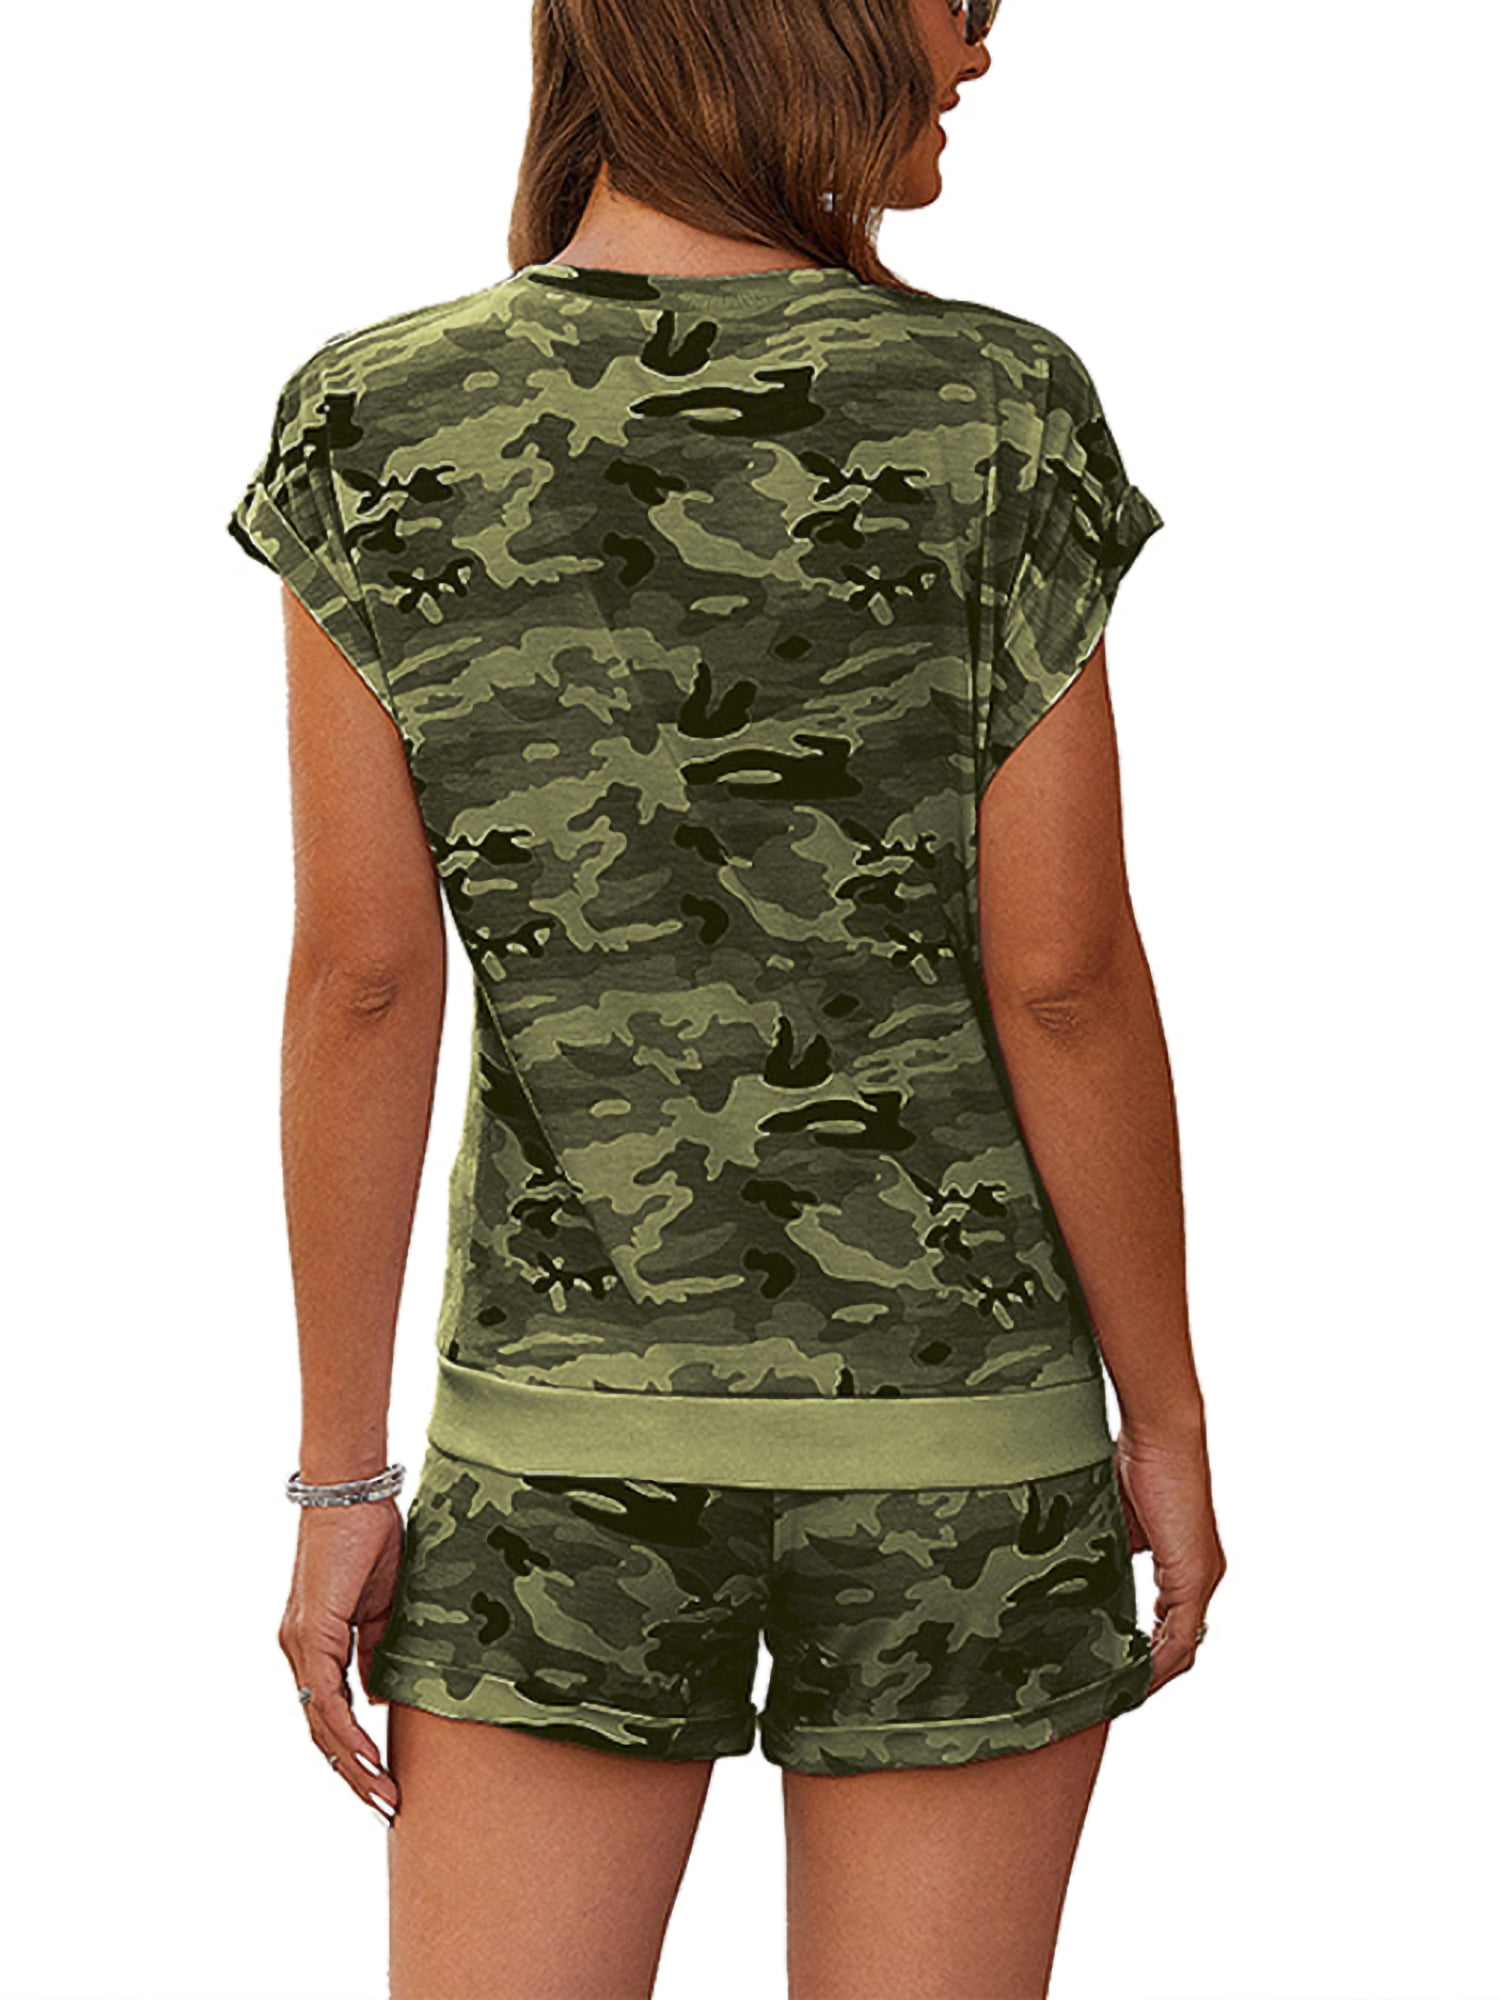 Spirio Womens Summer 2 Pieces Camo Print Tops with Shorts Tracksuit Outfit Set